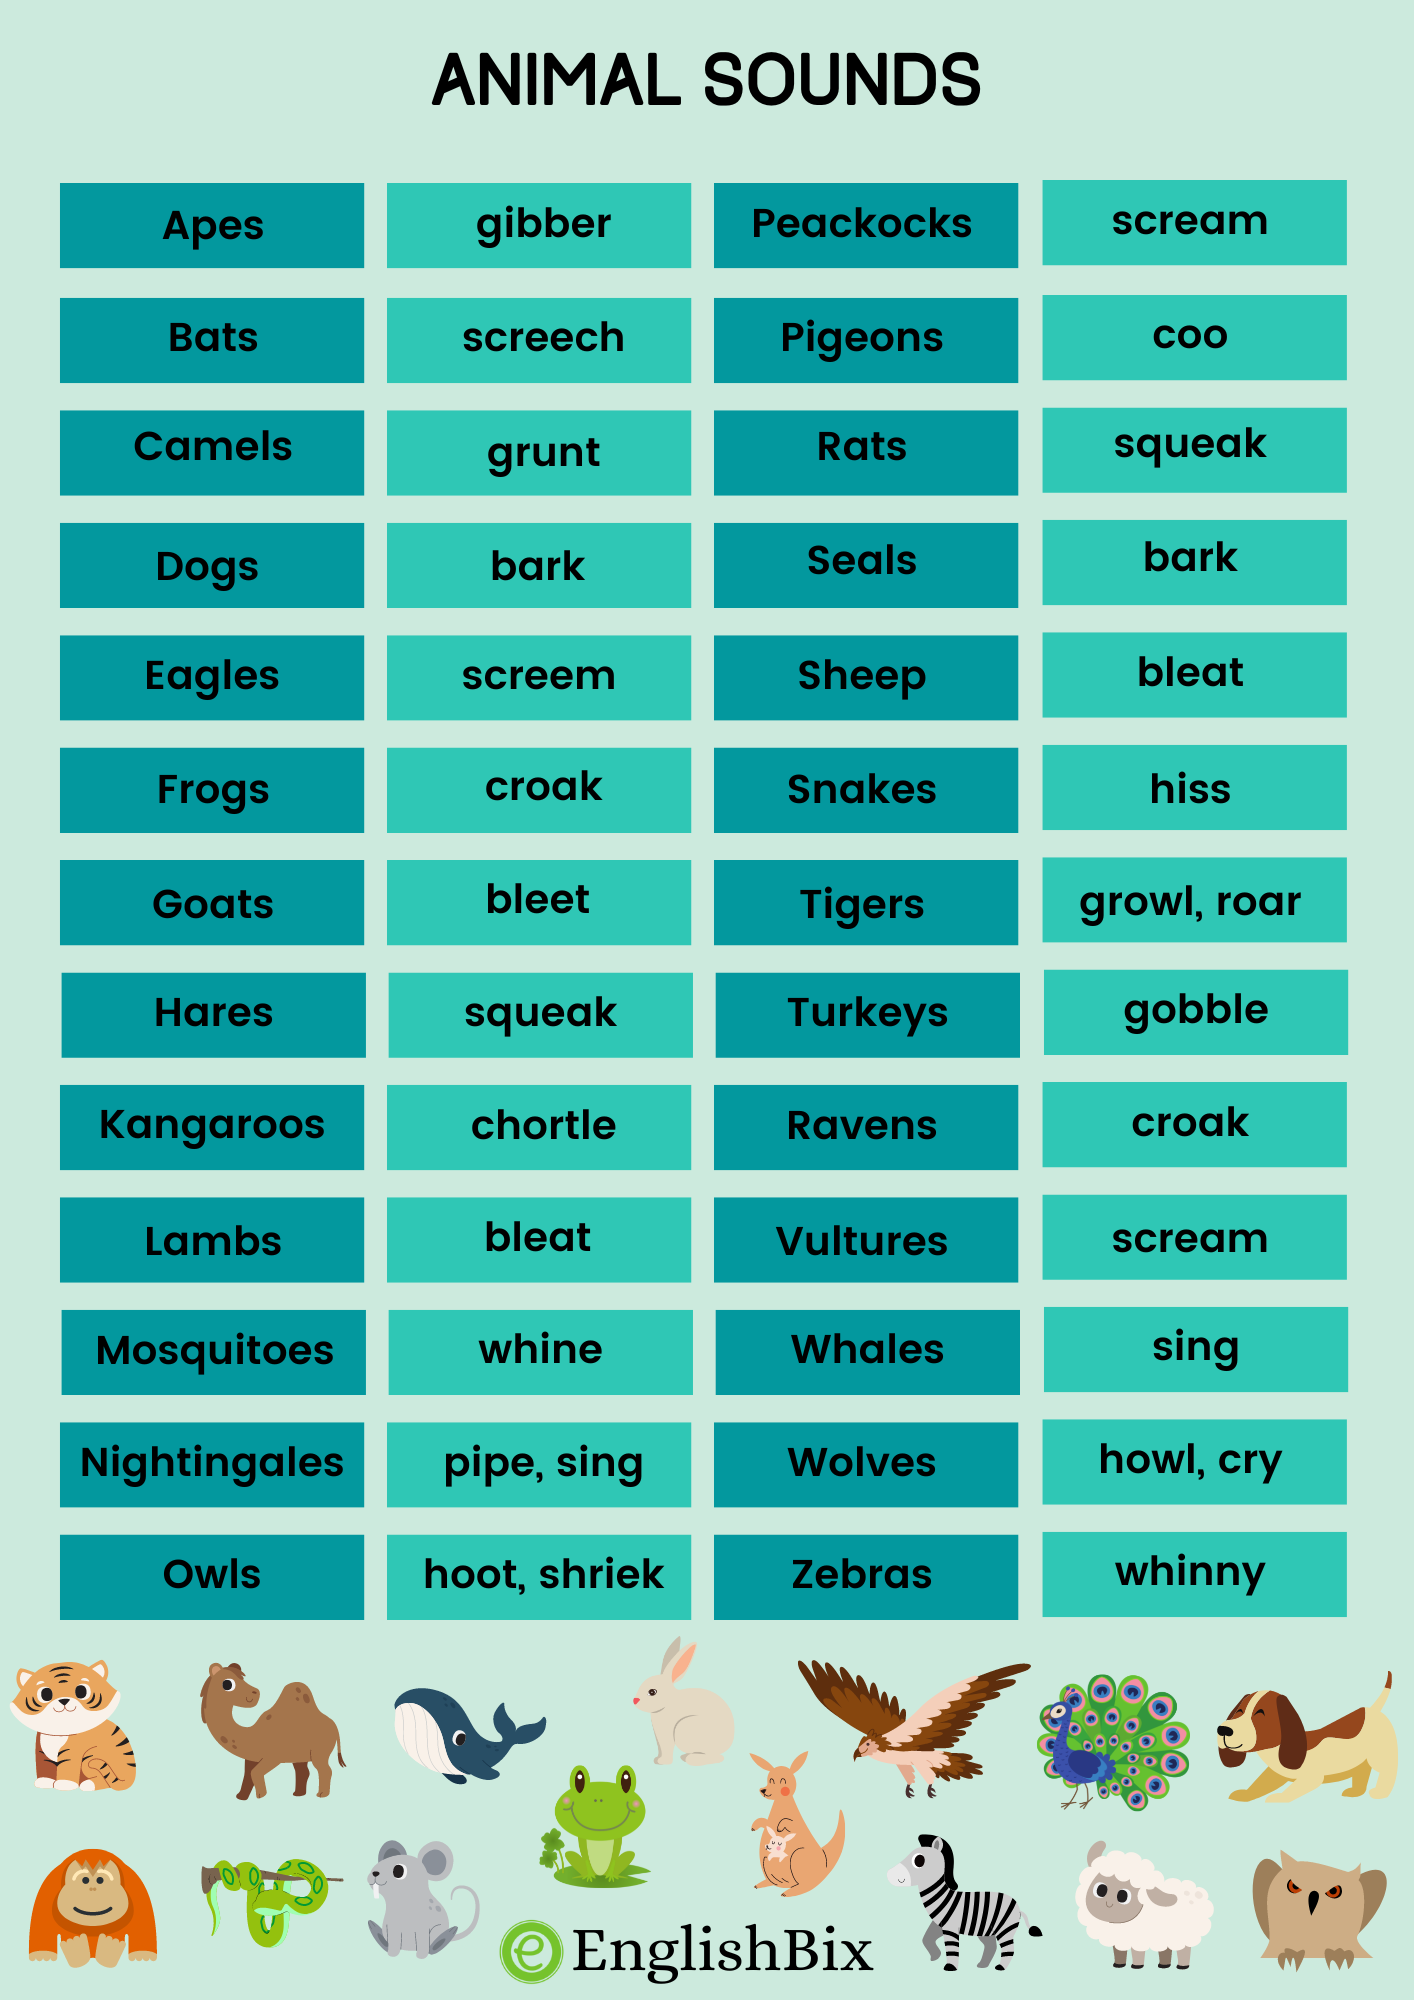 Animal Sounds List for Kids in English - A to Z - EnglishBix